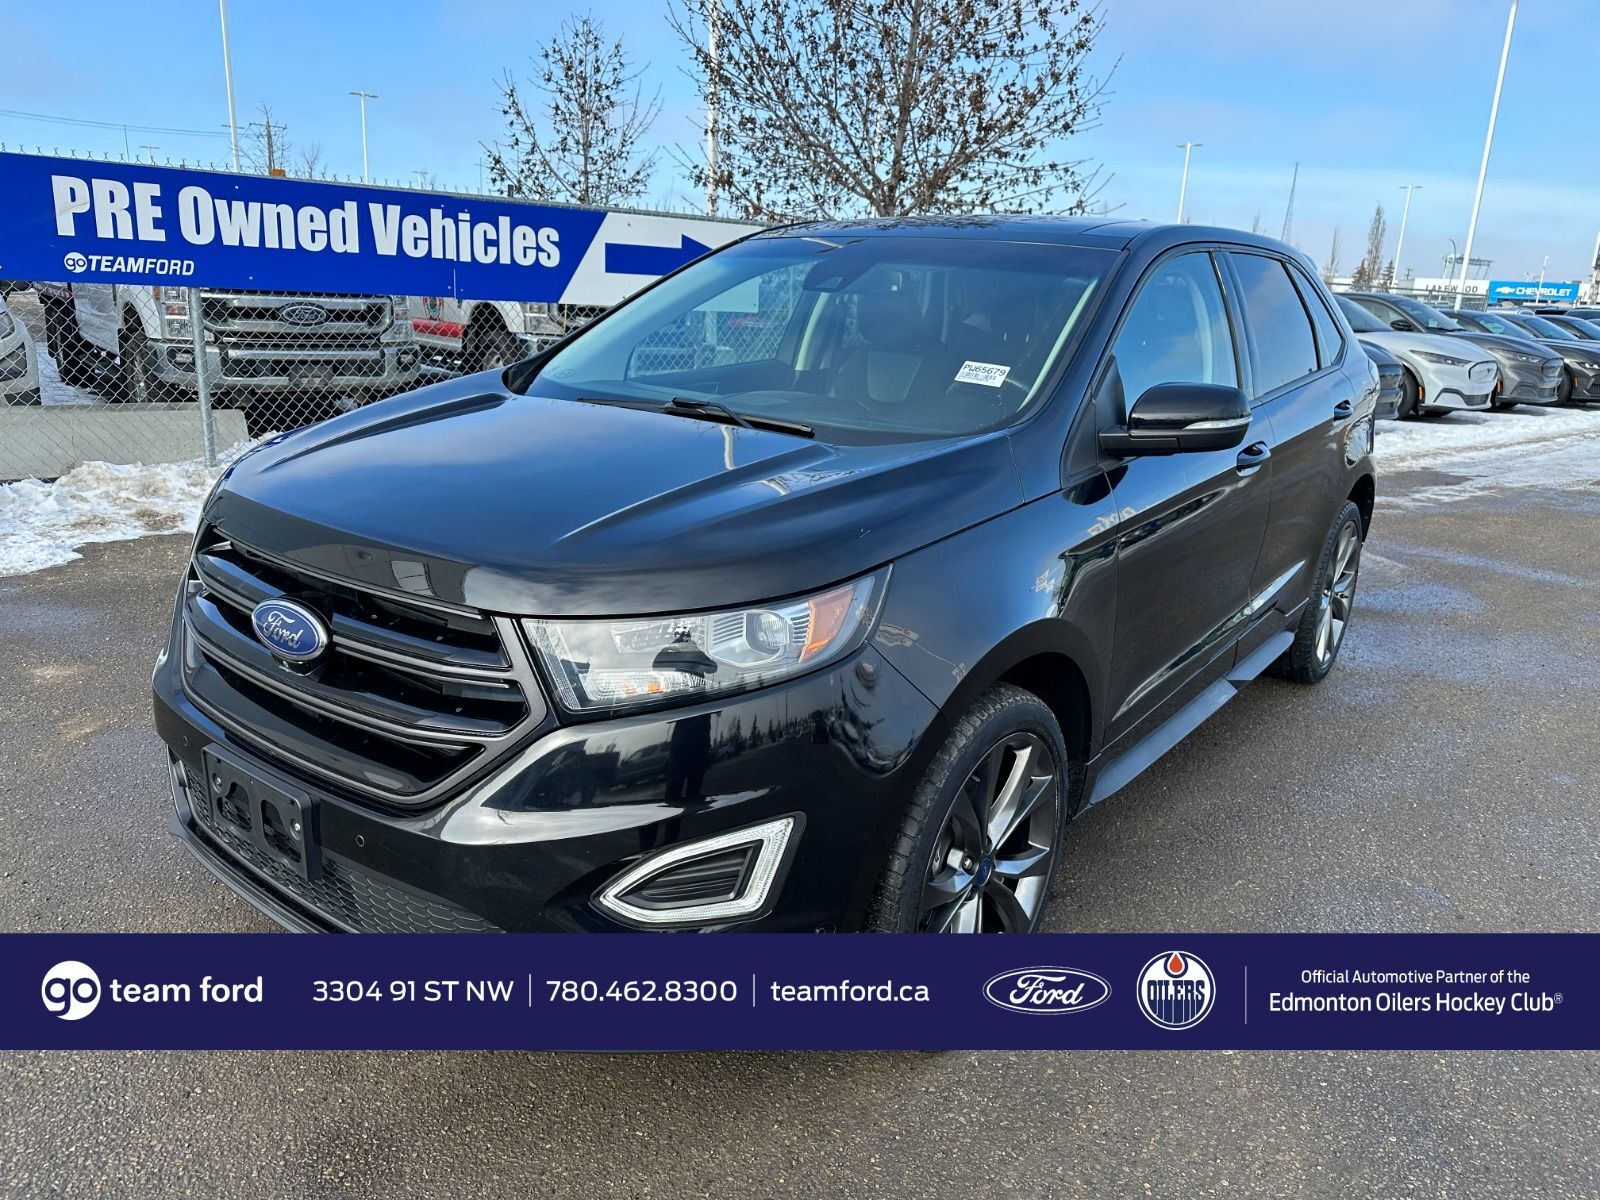 2017 Ford Edge SPORT - AWD, LEATHER, NAVIGATION, HEATED SEATS, BL